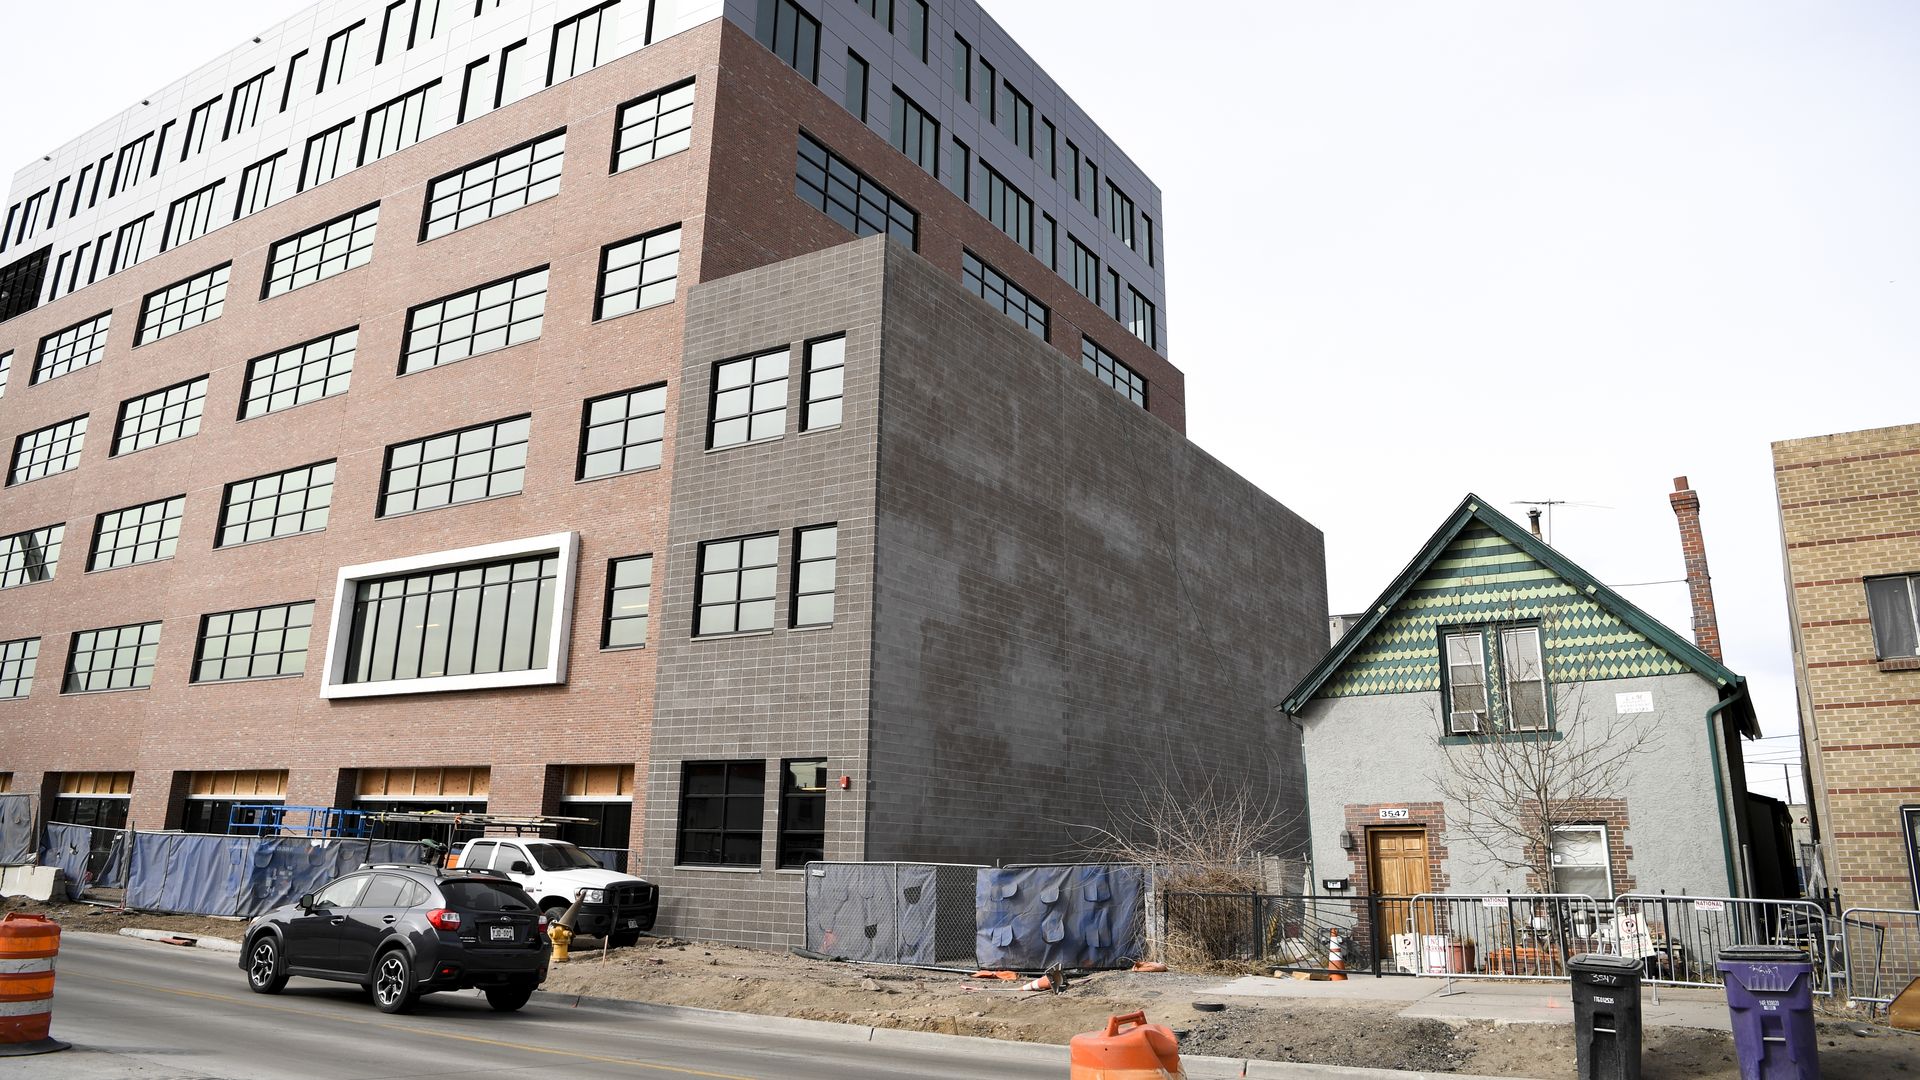 New construction in Denver's River North district in 2018. Photo: AAron Ontiveroz/The Denver Post via Getty Images